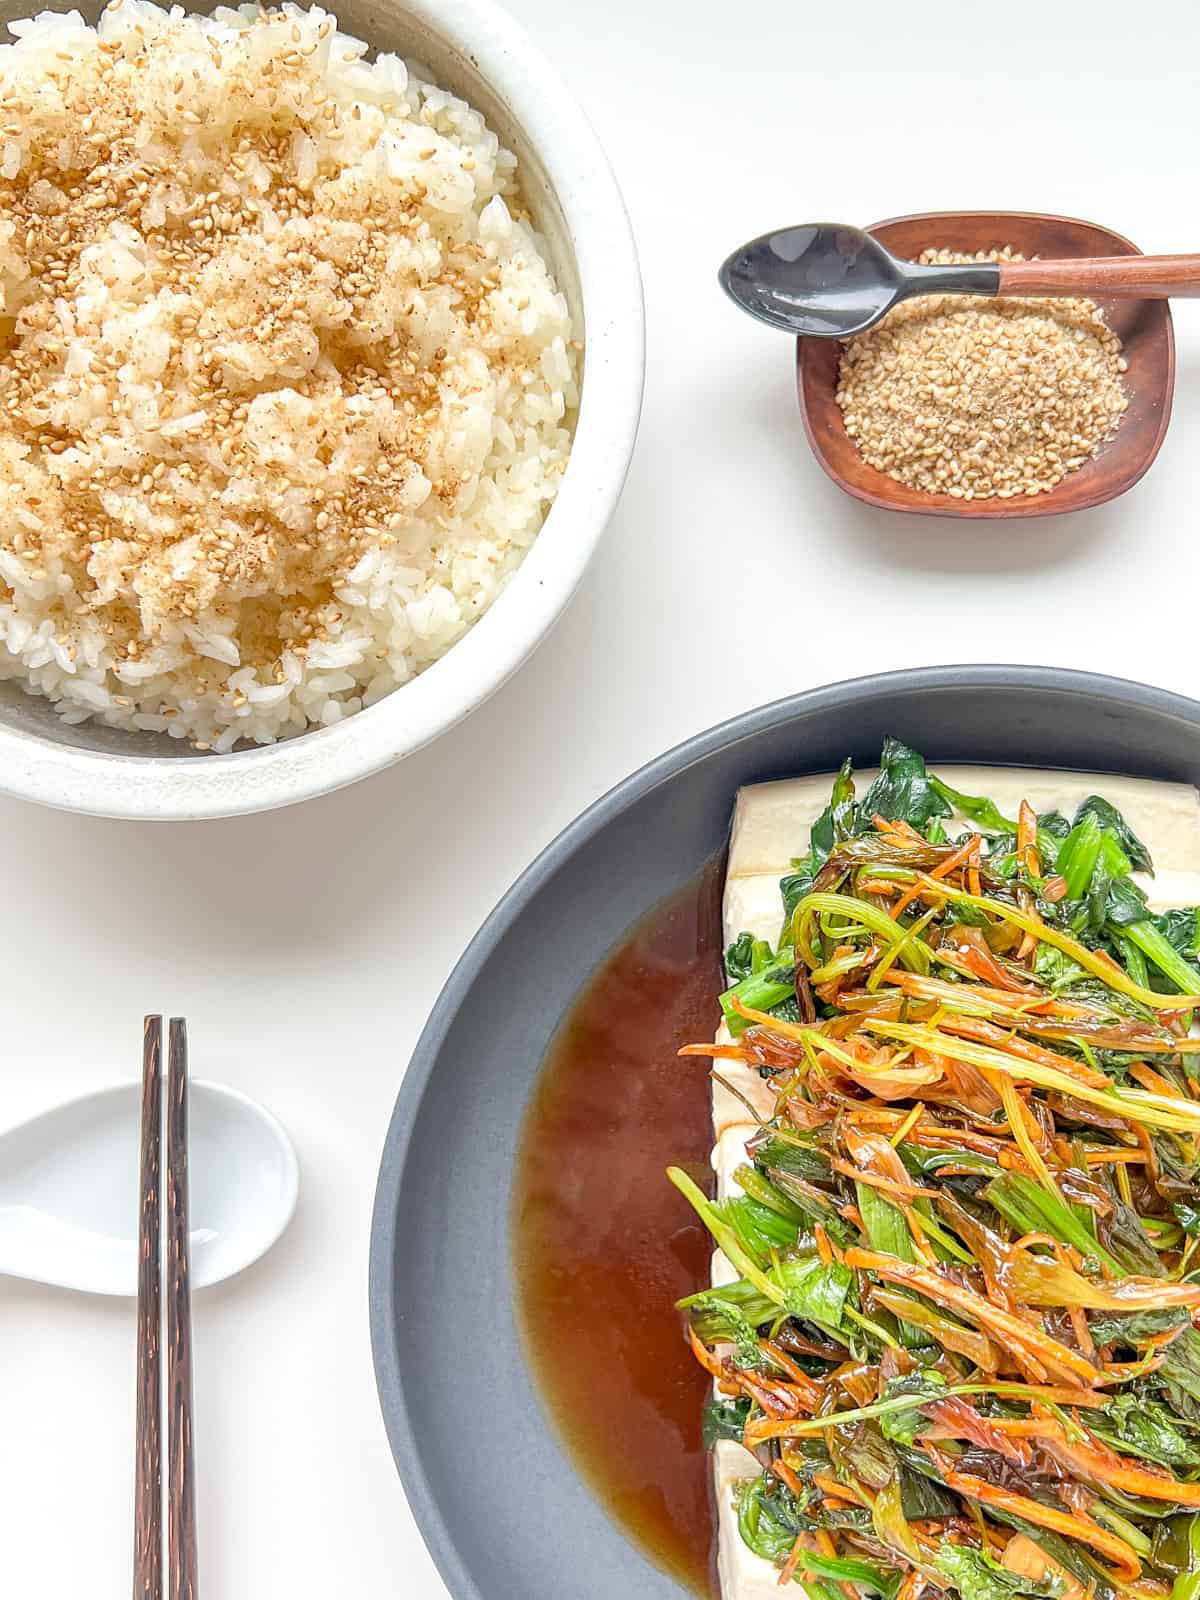 An image showing a meal laid out on a white counter, consisting of a dish of Steamed Silken Tofu with Ginger and Fragrant Greens, Steamed Rice sprinkled with Roasted Sesame Seed Salt, a spoon, chopsticks and a dish of Sesame Seed Salt.